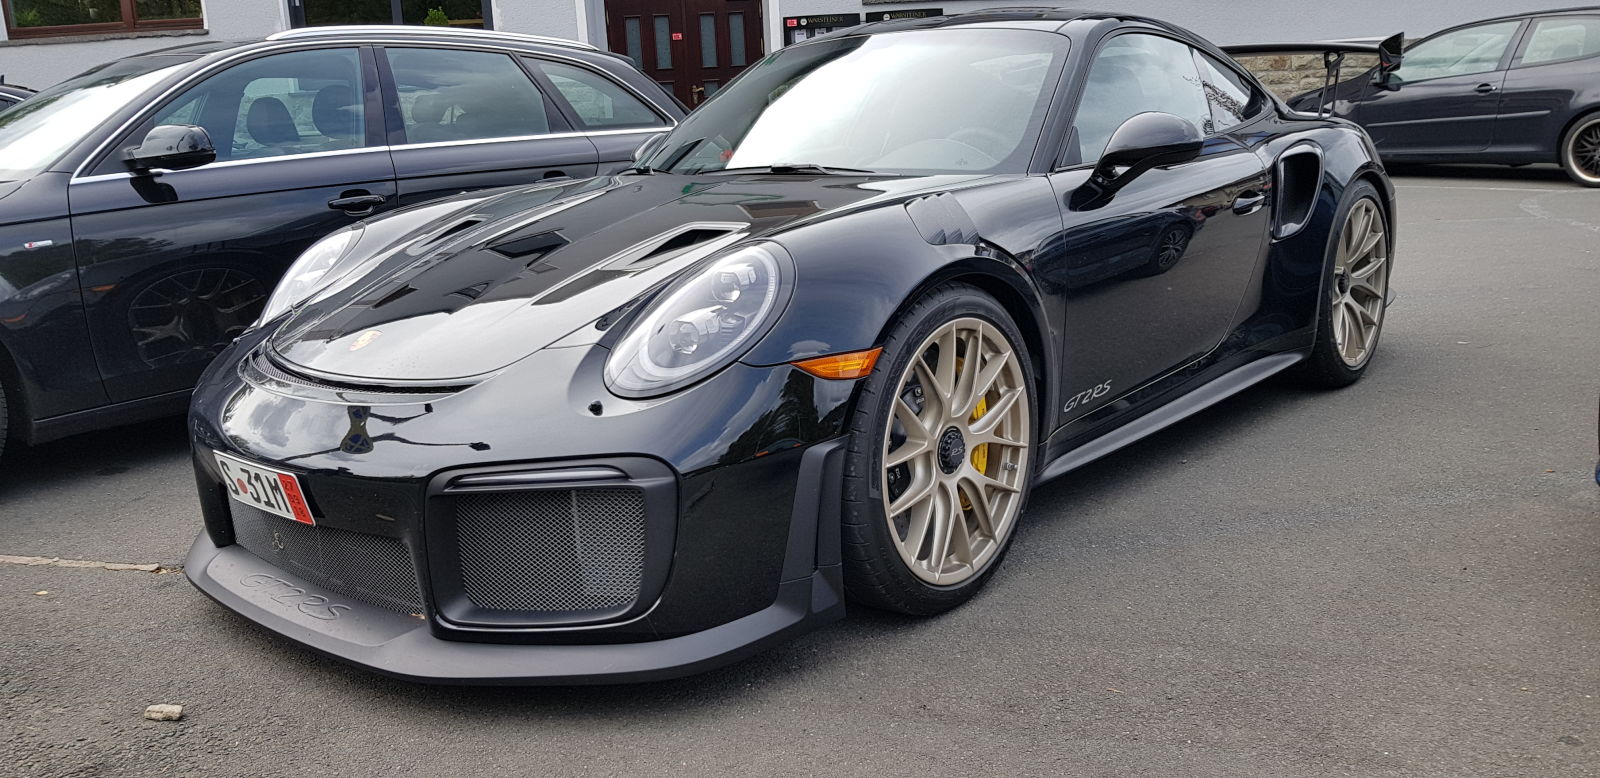 We spotted lots of cool cars around the ‘Ring like this 911 GT2 RS. 